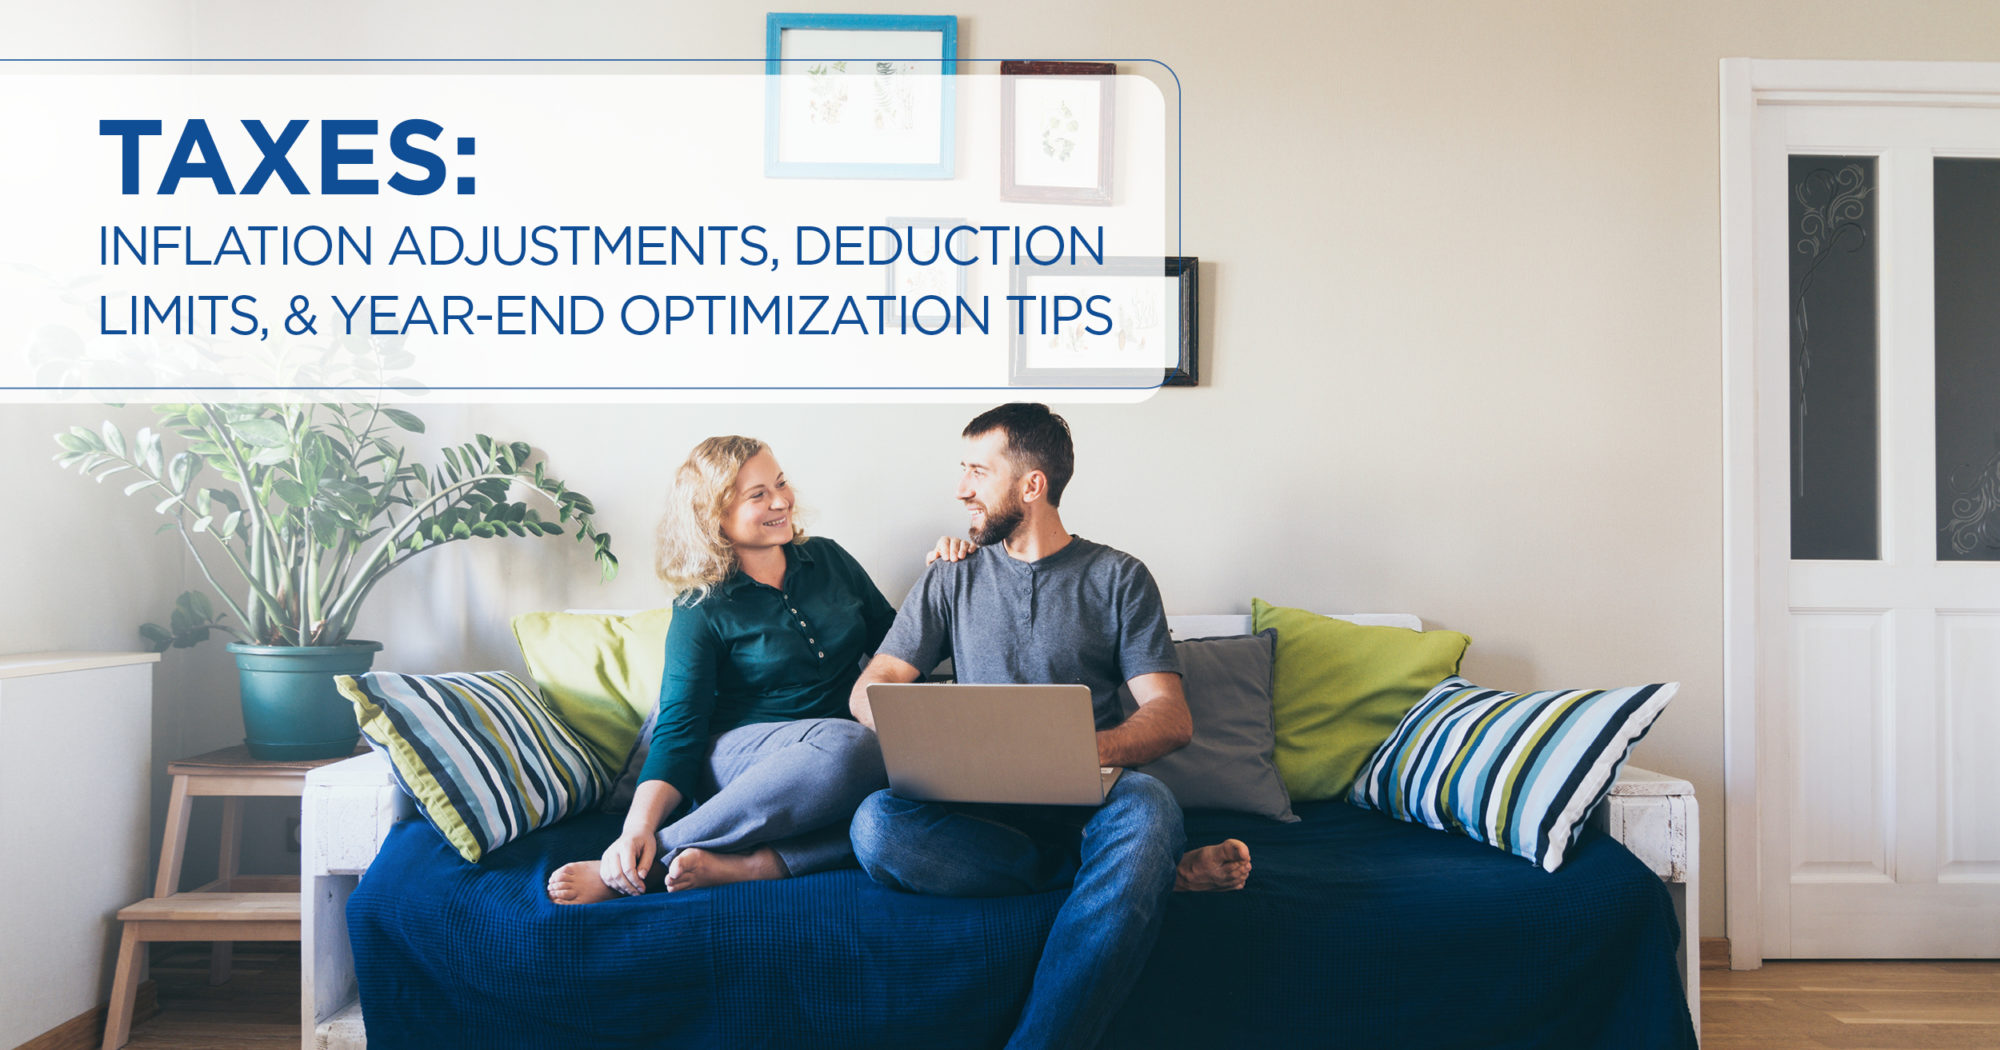 taxes-inflation-adjustments-deduction-limits-and-optimization-tips